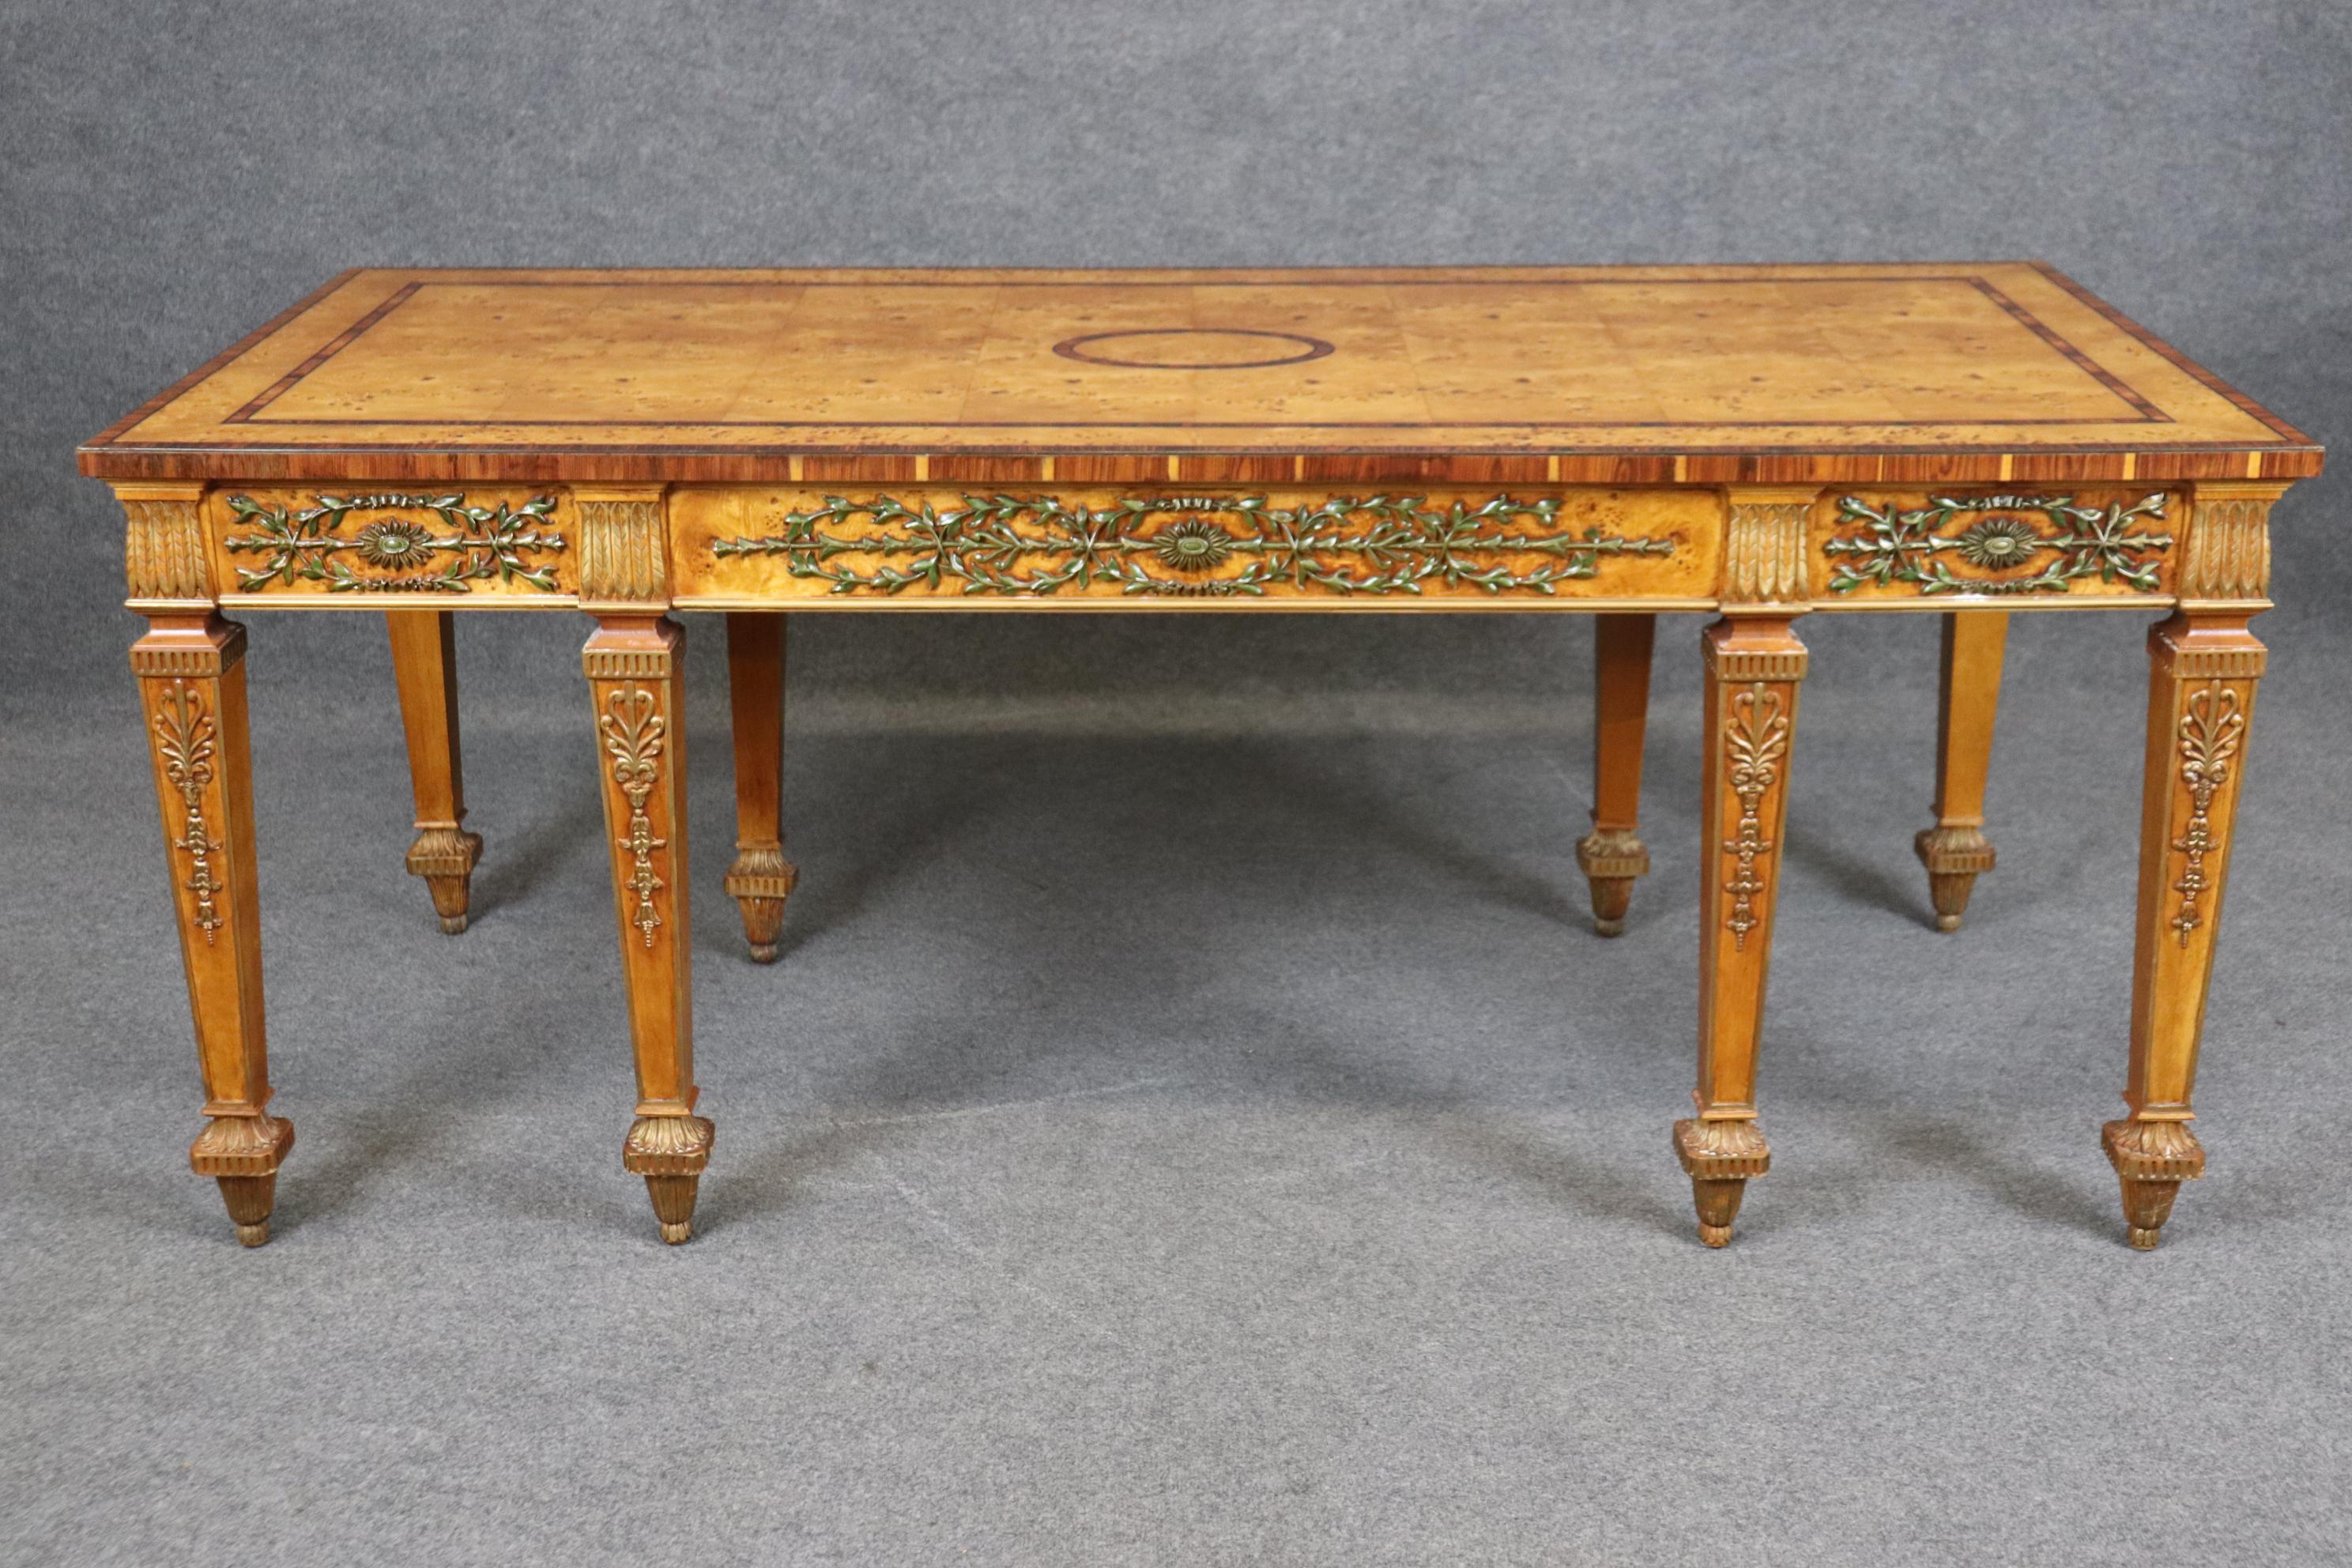 Sycomore Henredon Grand Provenance Anglais Style Adams Decorated Carved Writing Desk 